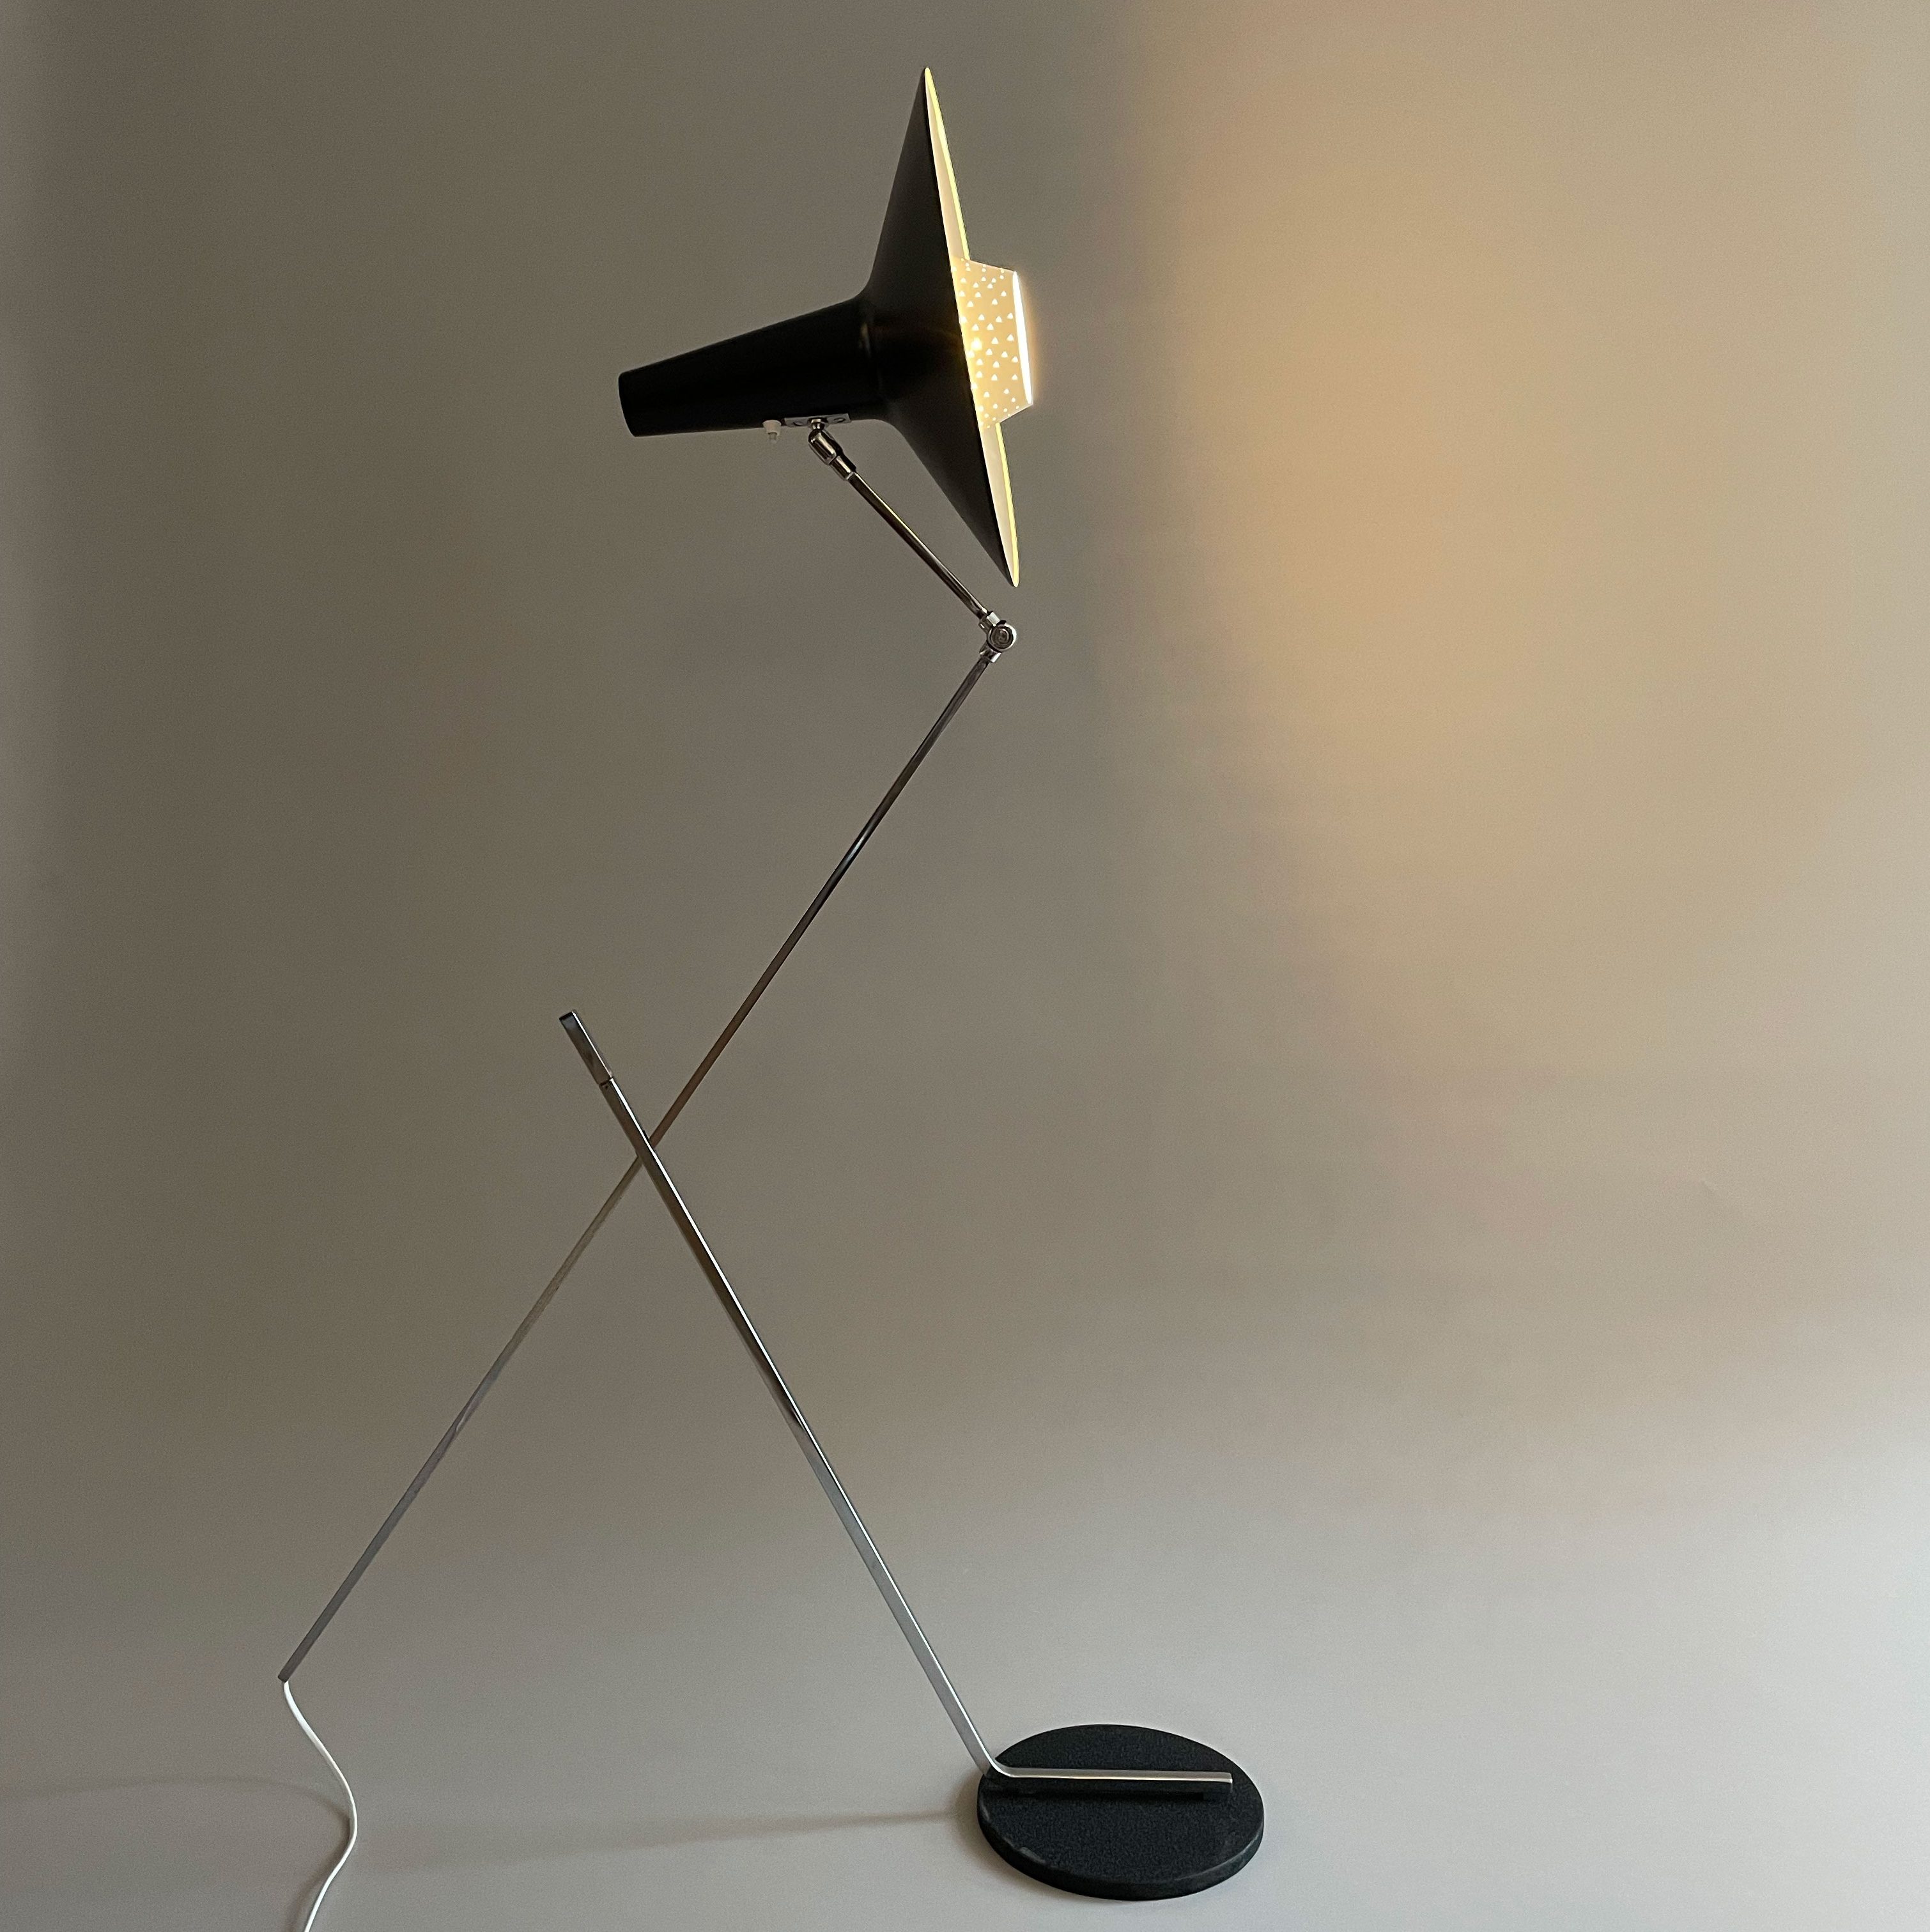 Mid-Century Floor Lamp in Black and Chrome. Height adjustable with a cantilever function. Available at heyday möbel, Grubenstrasse 19, 8045 Zürich, Switzerland.